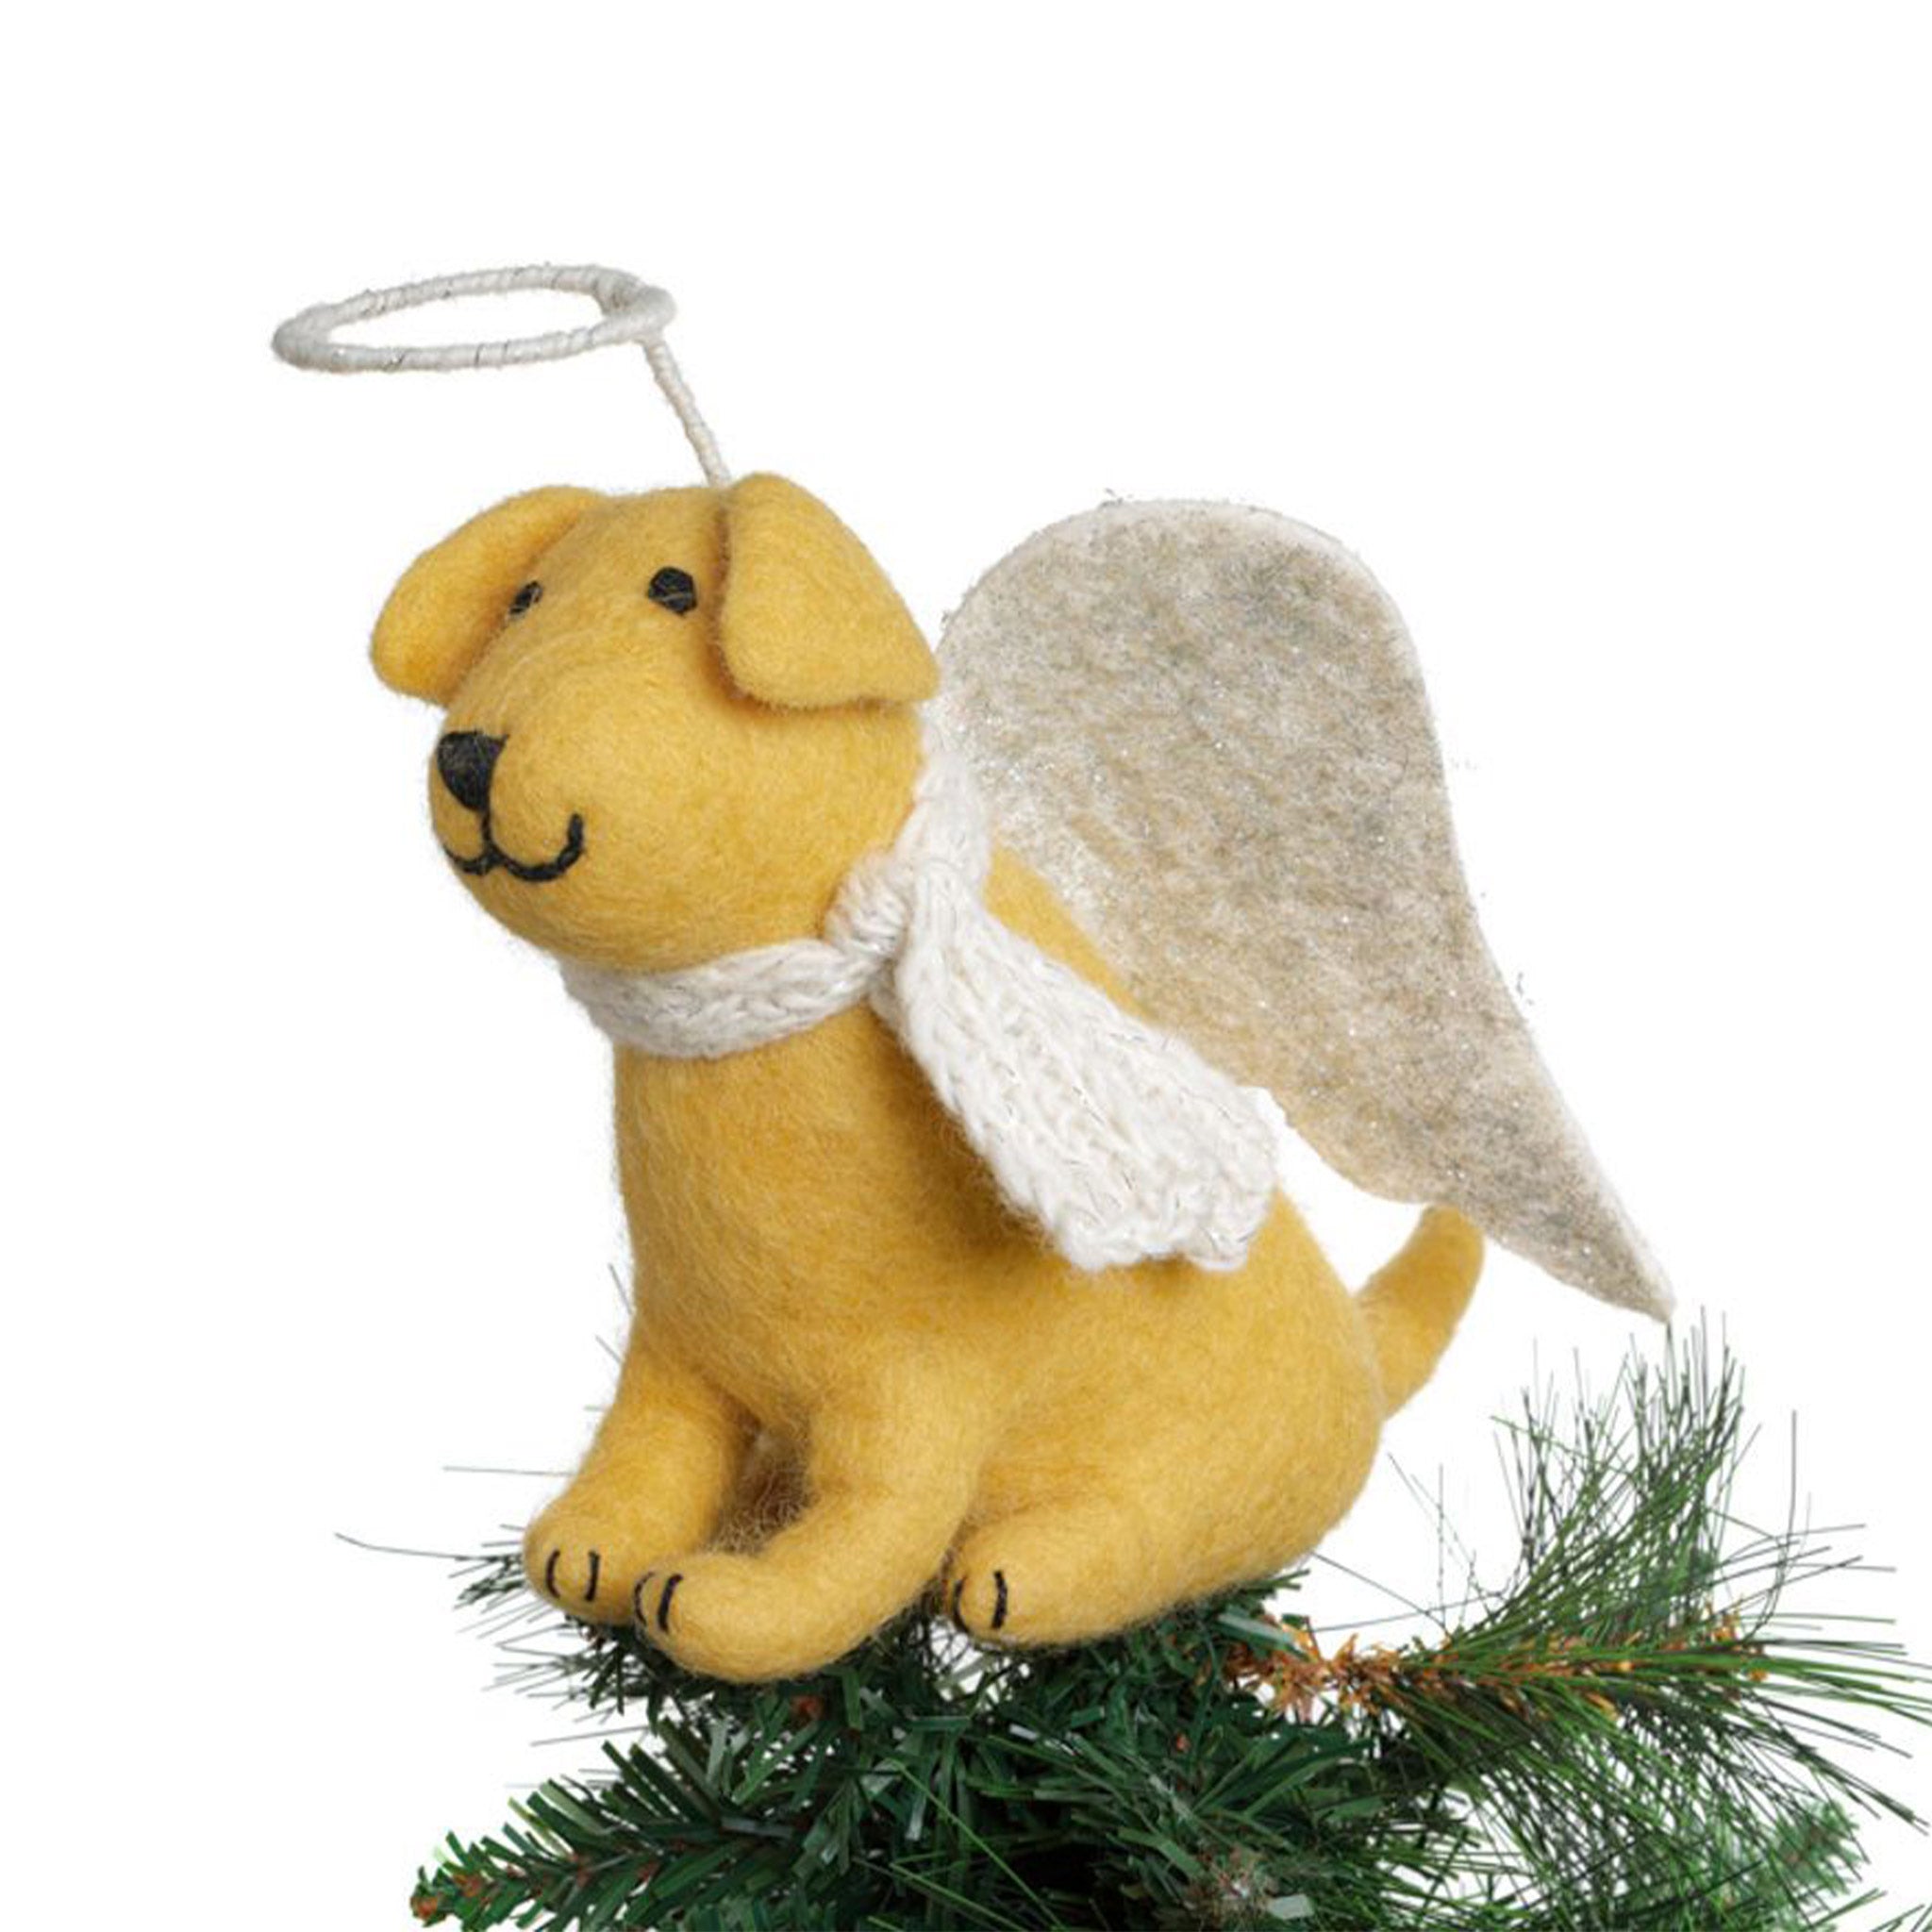 Against a white background, this image is a close up view of the Yellow Labrador Tree Topper set upon the top of a Christmas Tree.